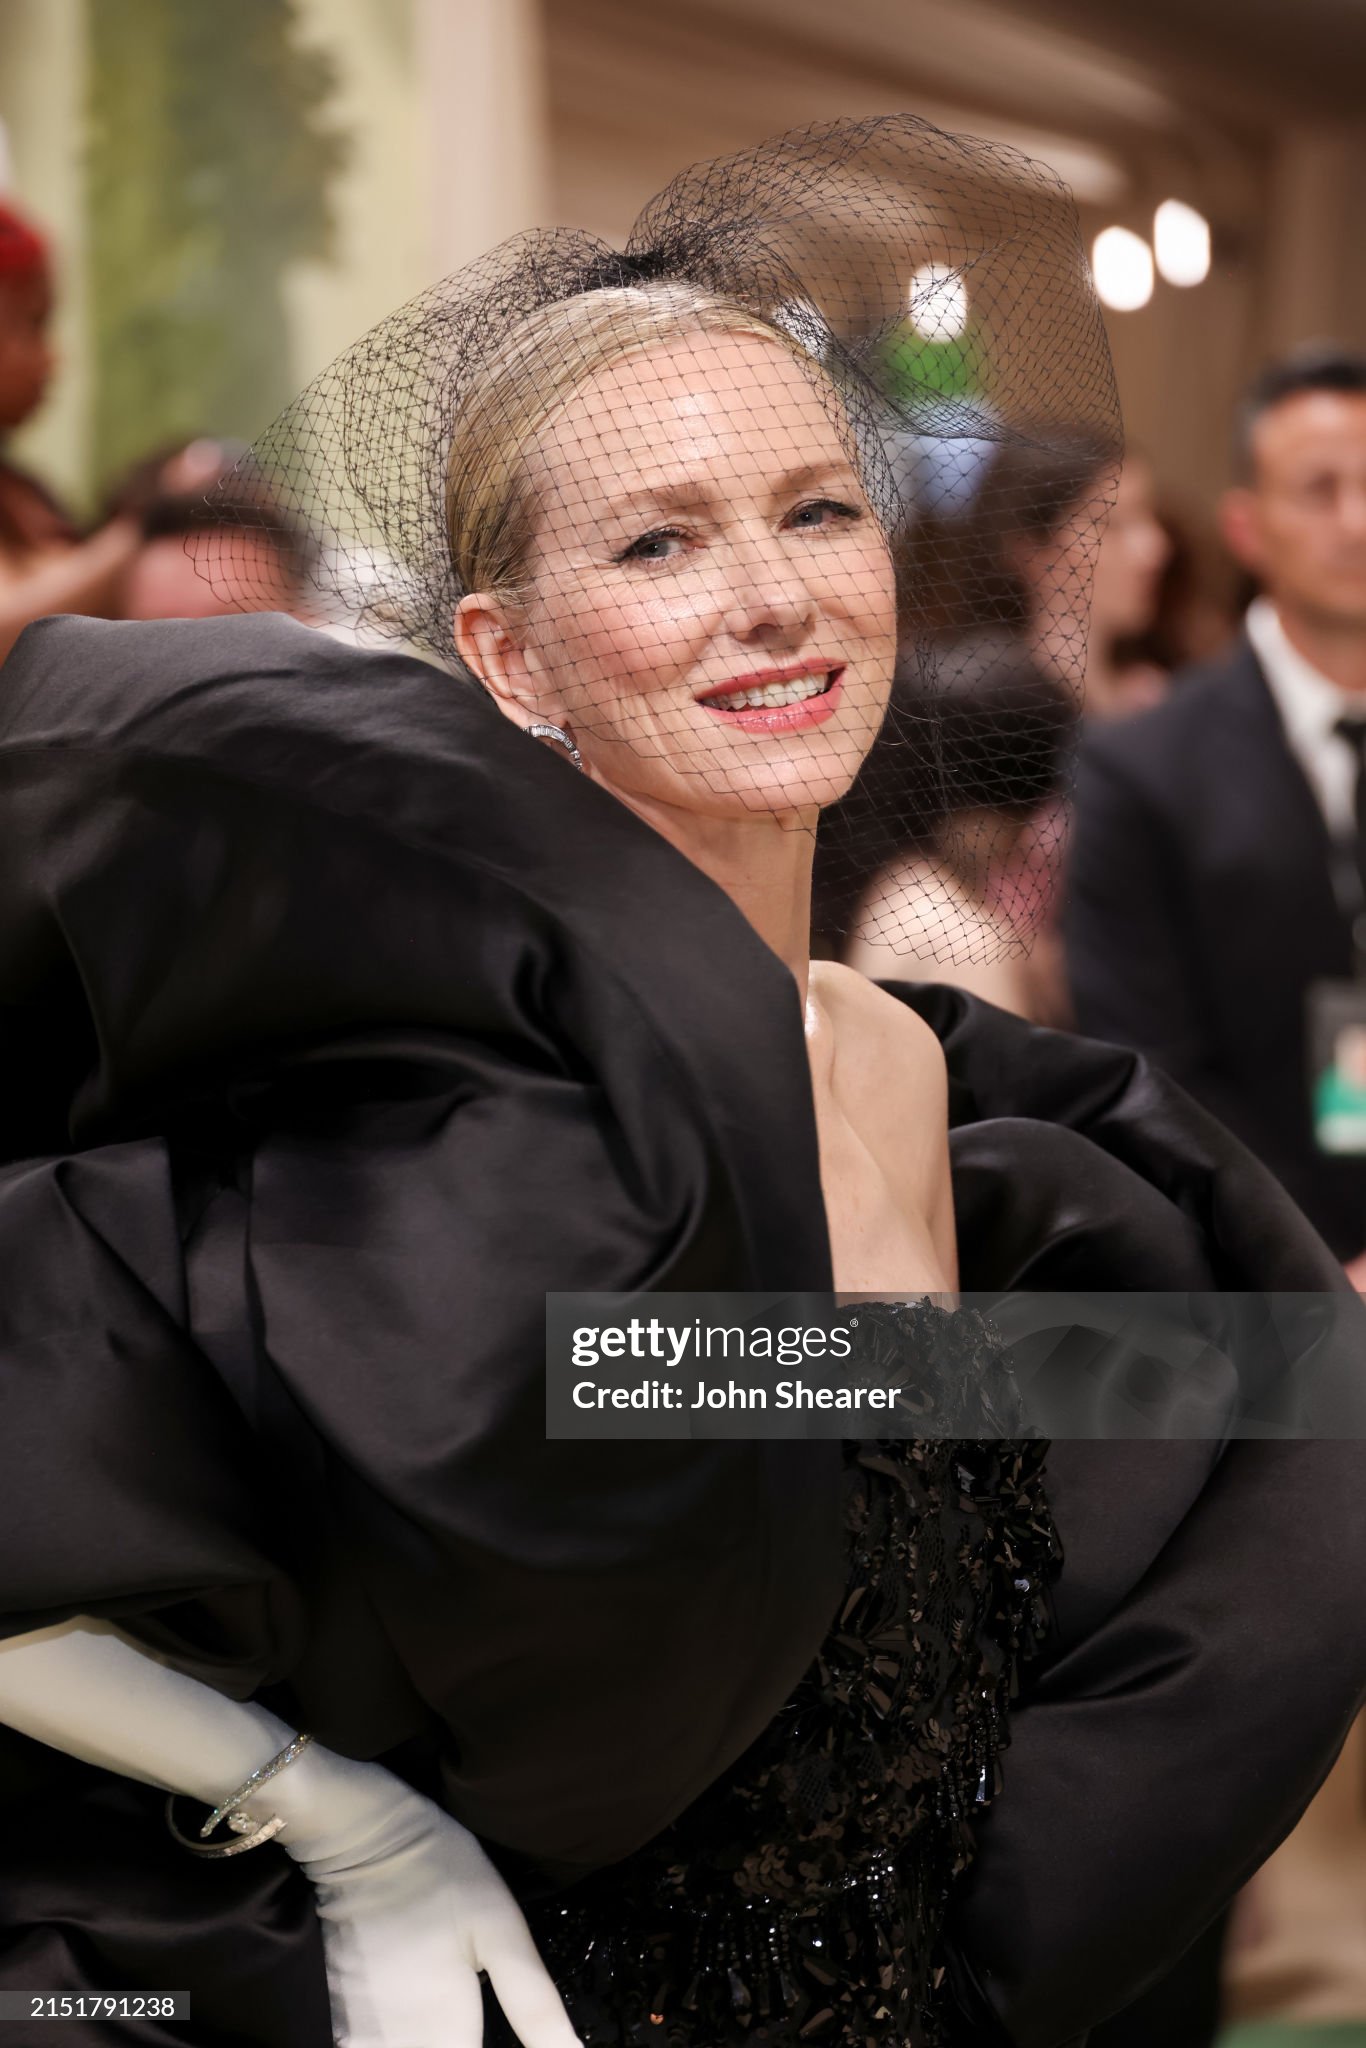 gettyimages-2151791238-2048x2048.jpg